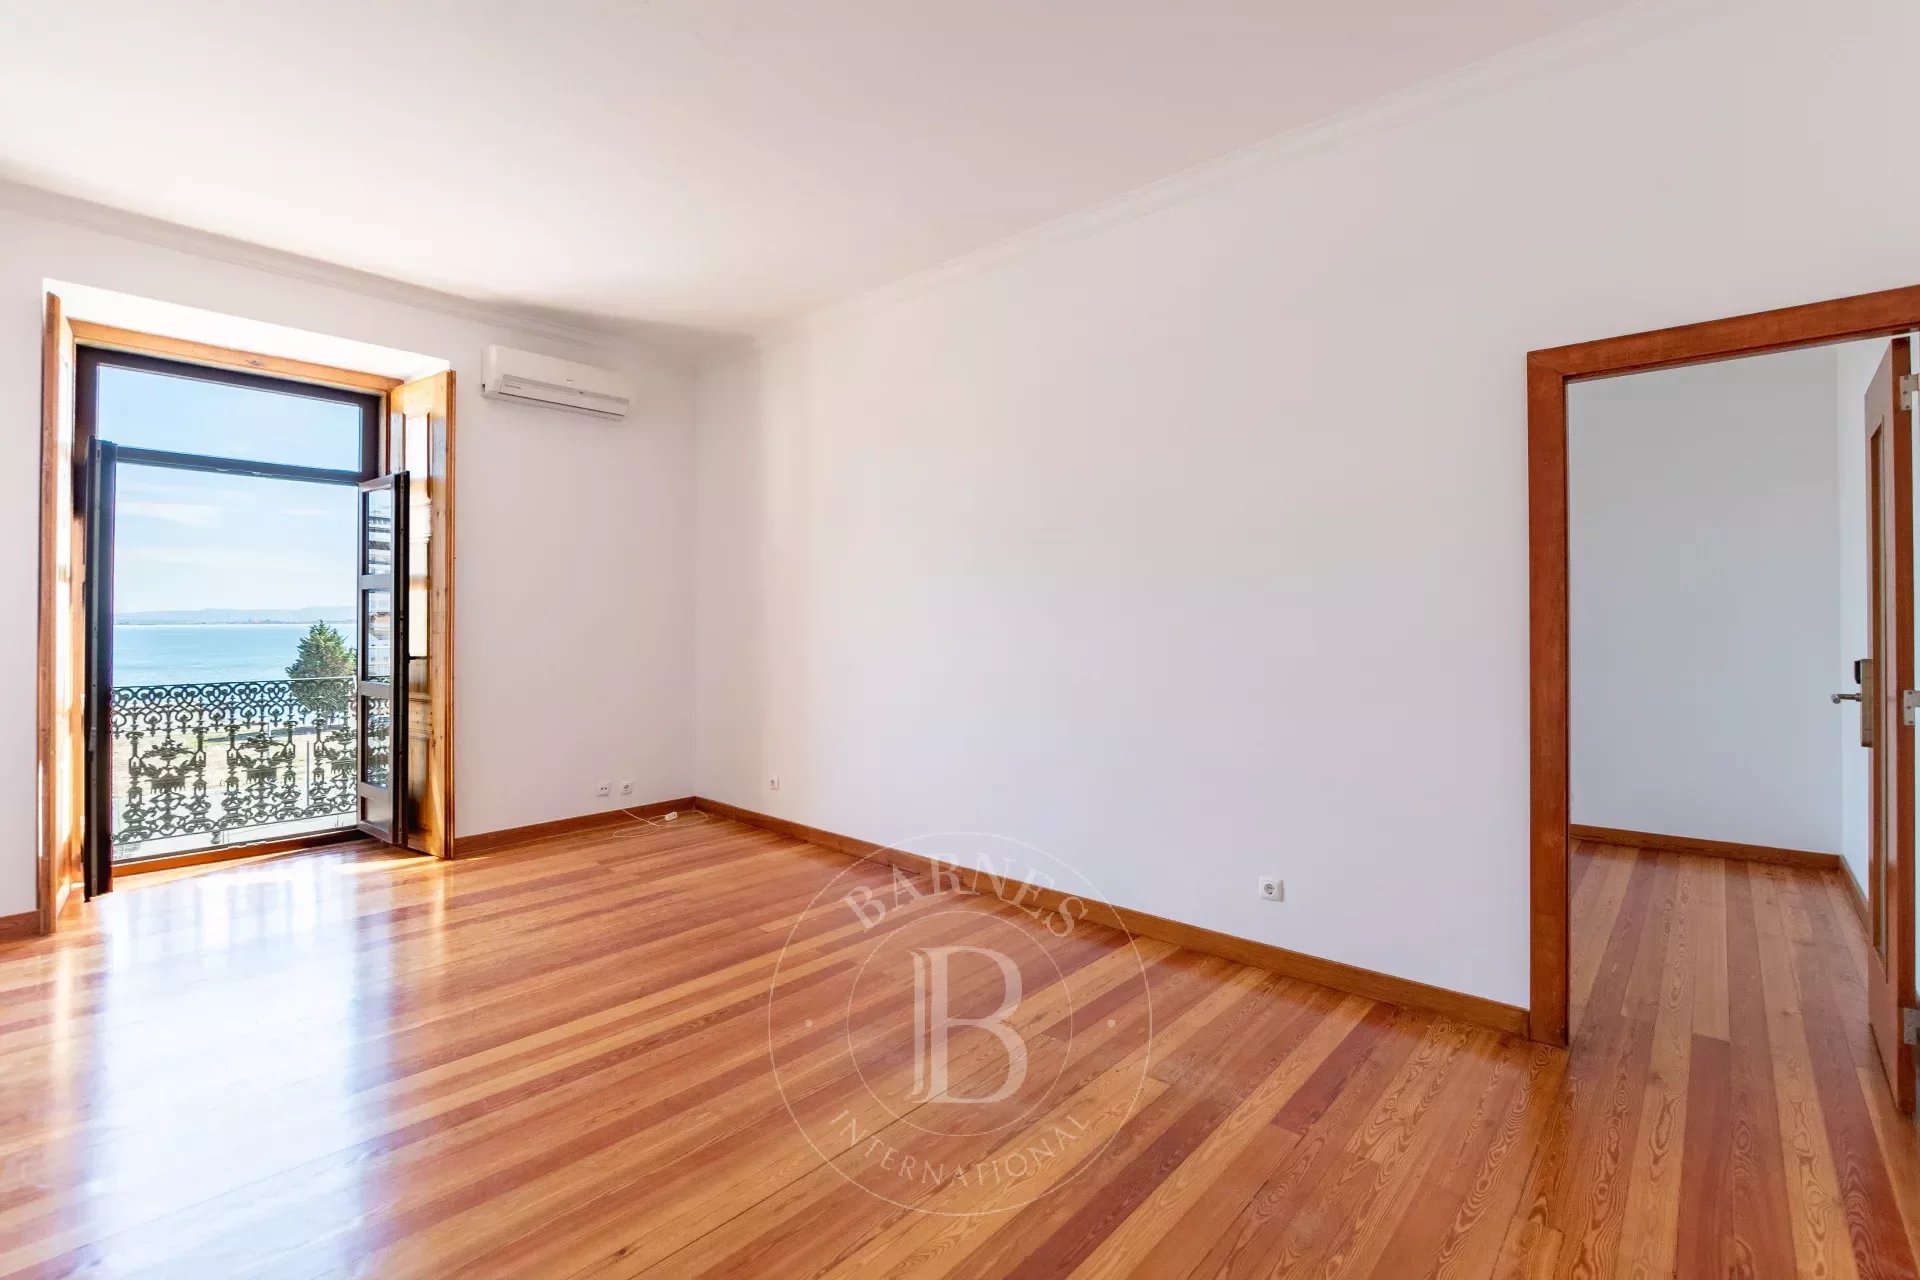 Beautiful two-bedroom apartment with river front views.